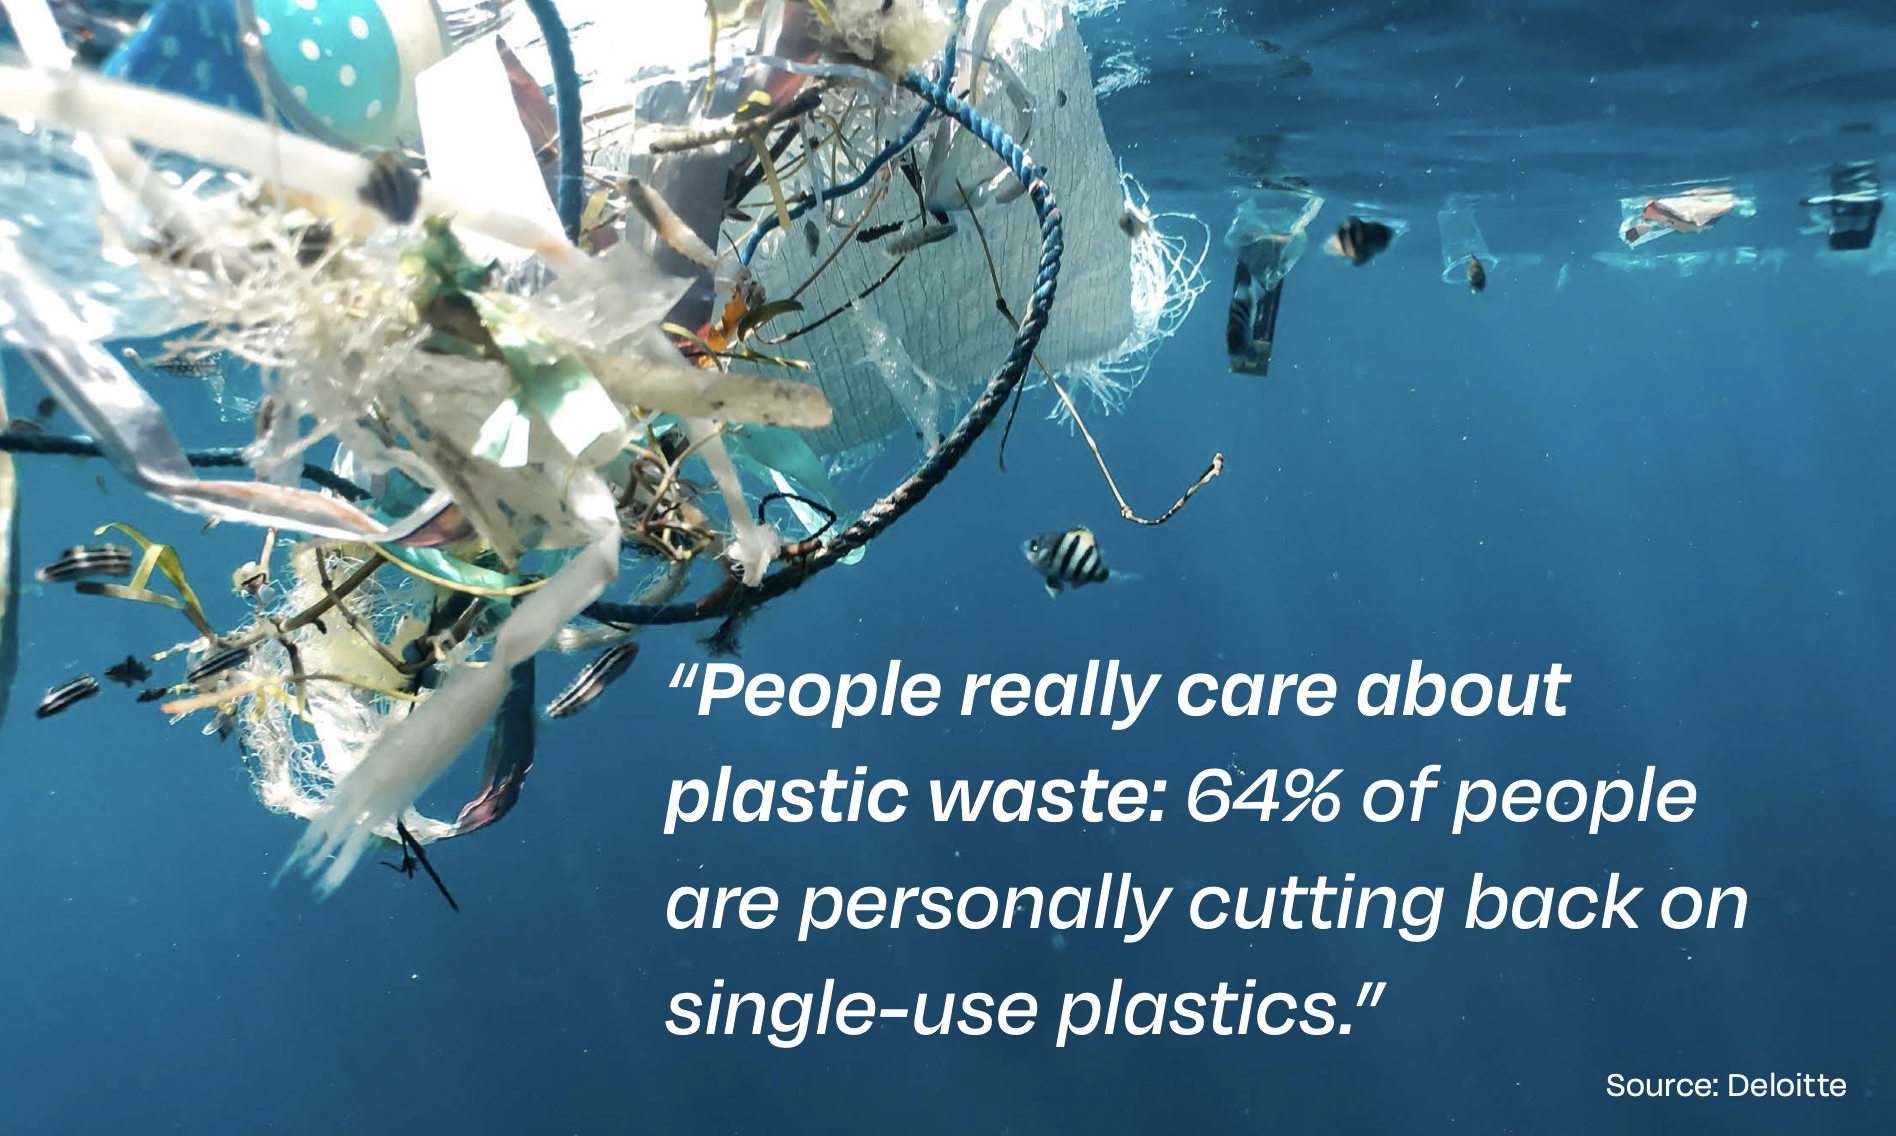 Picture of plastic floating in the ocean. Text reads "People really care about plastic waste: 64% of people are personally cutting back on single-use plastics 